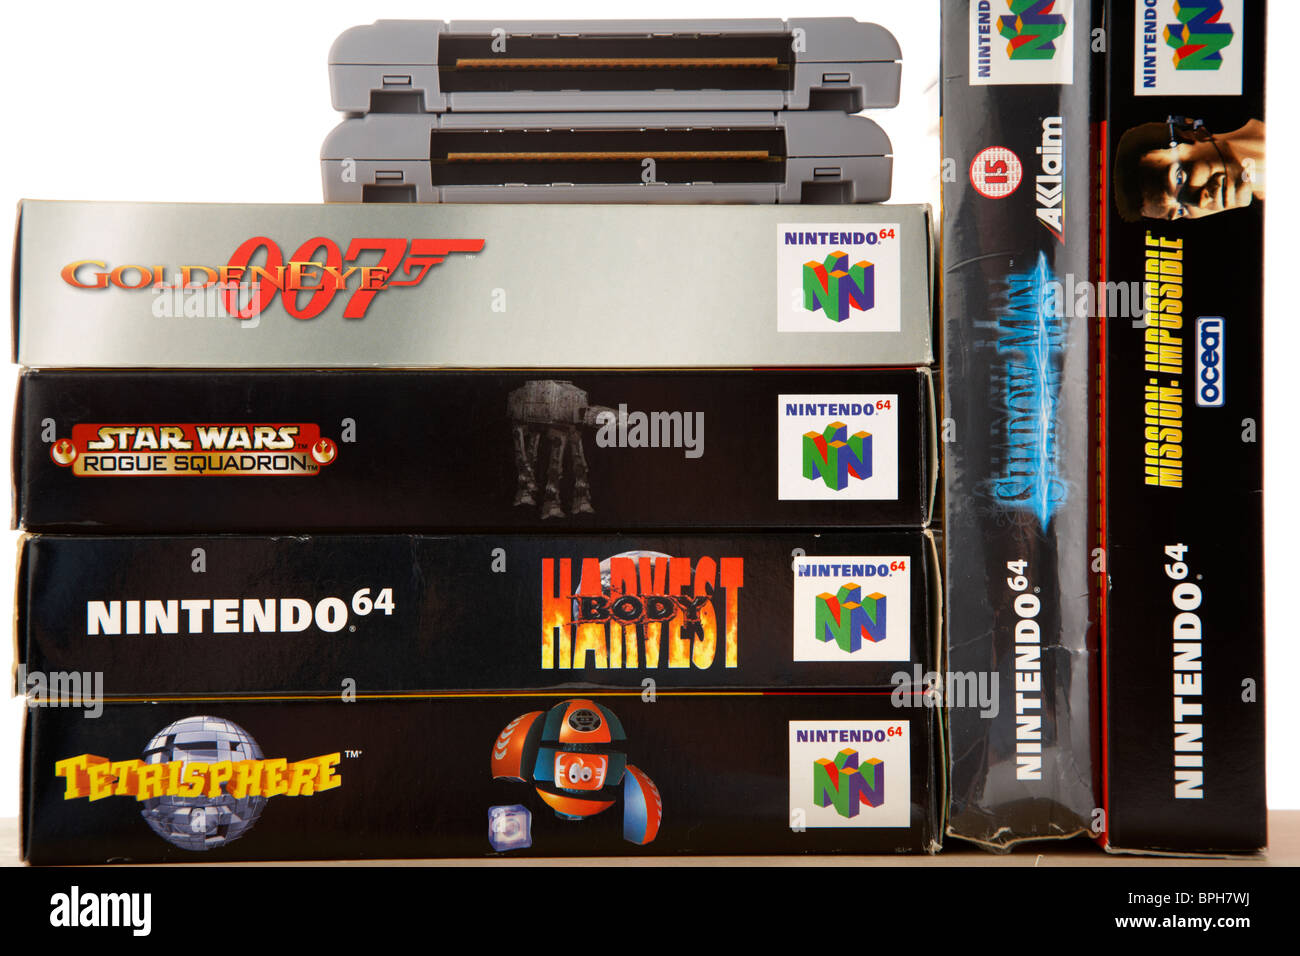 original games for the nintendo n64 console from the 90s vintage retro gaming nintendo cartridges Stock Photo